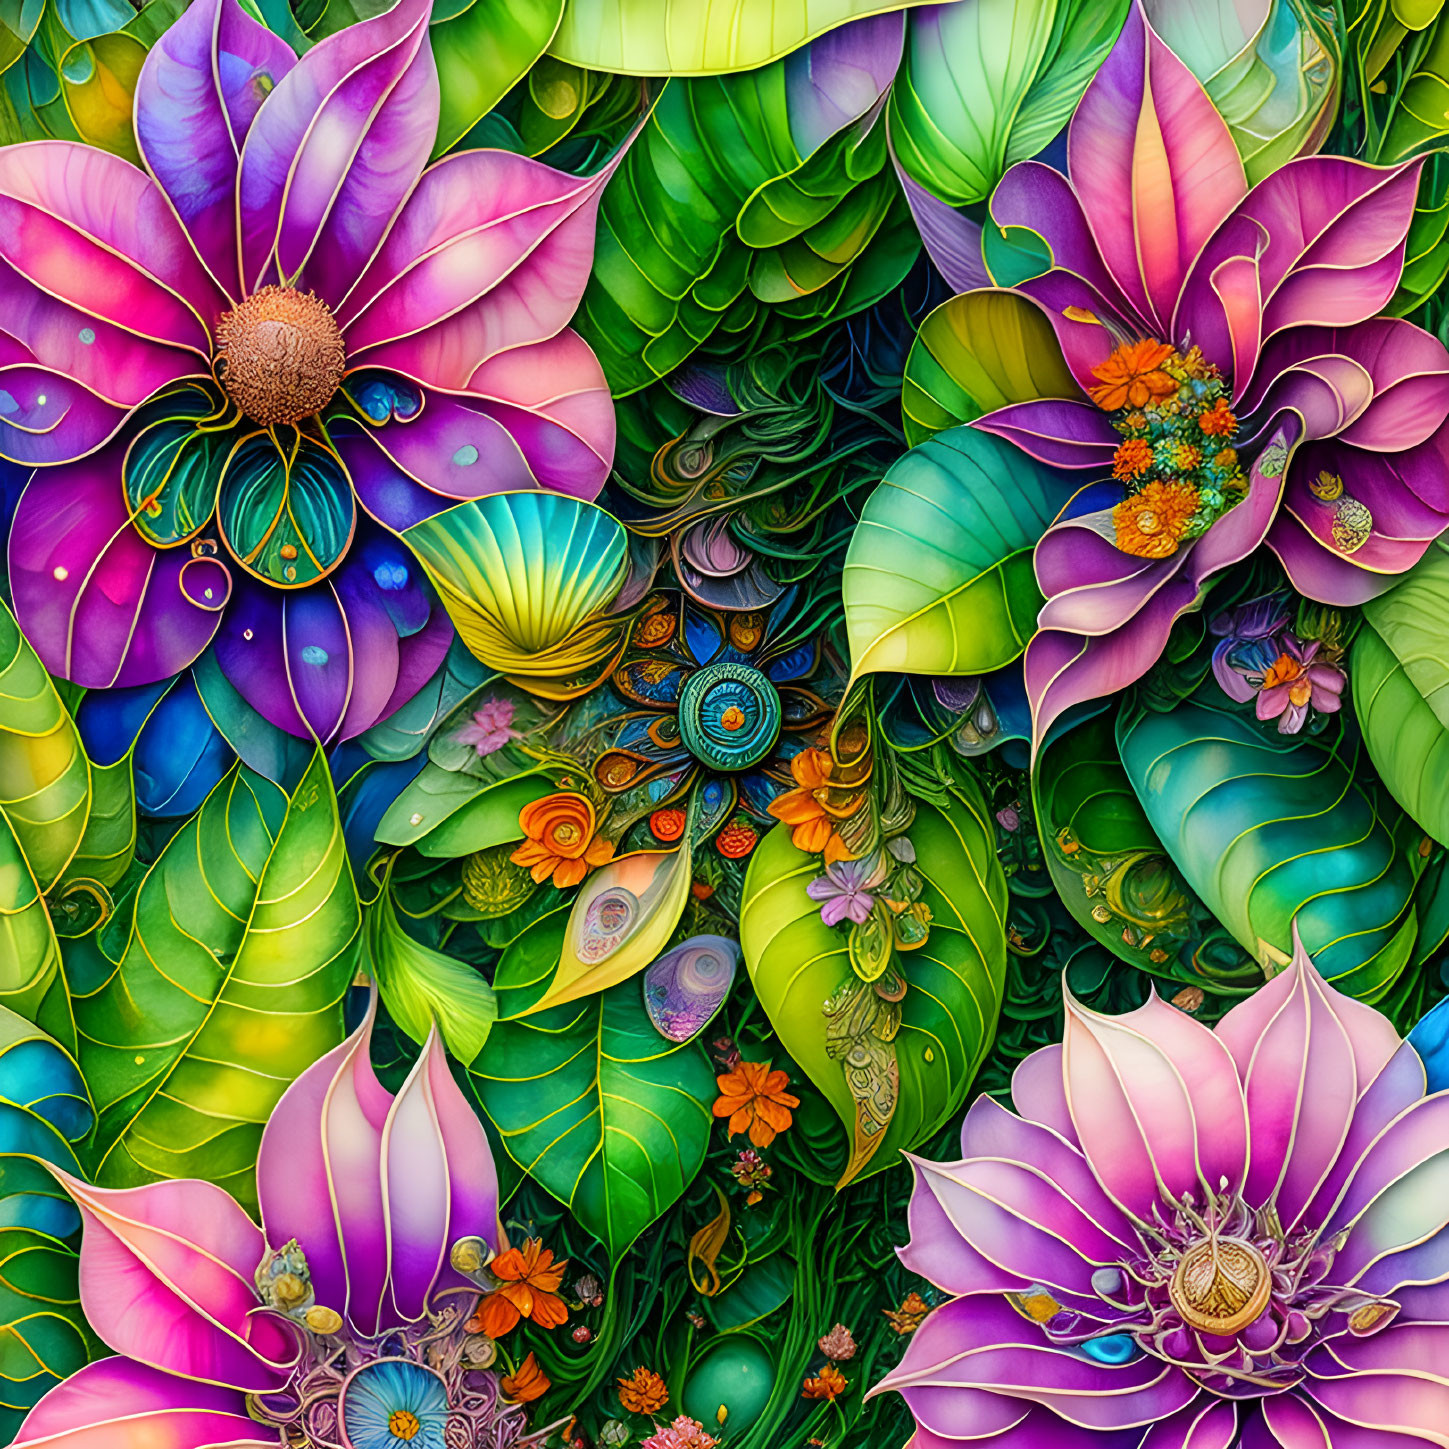 Colorful digital floral scene with exotic flowers in pink, purple, green, and blue.